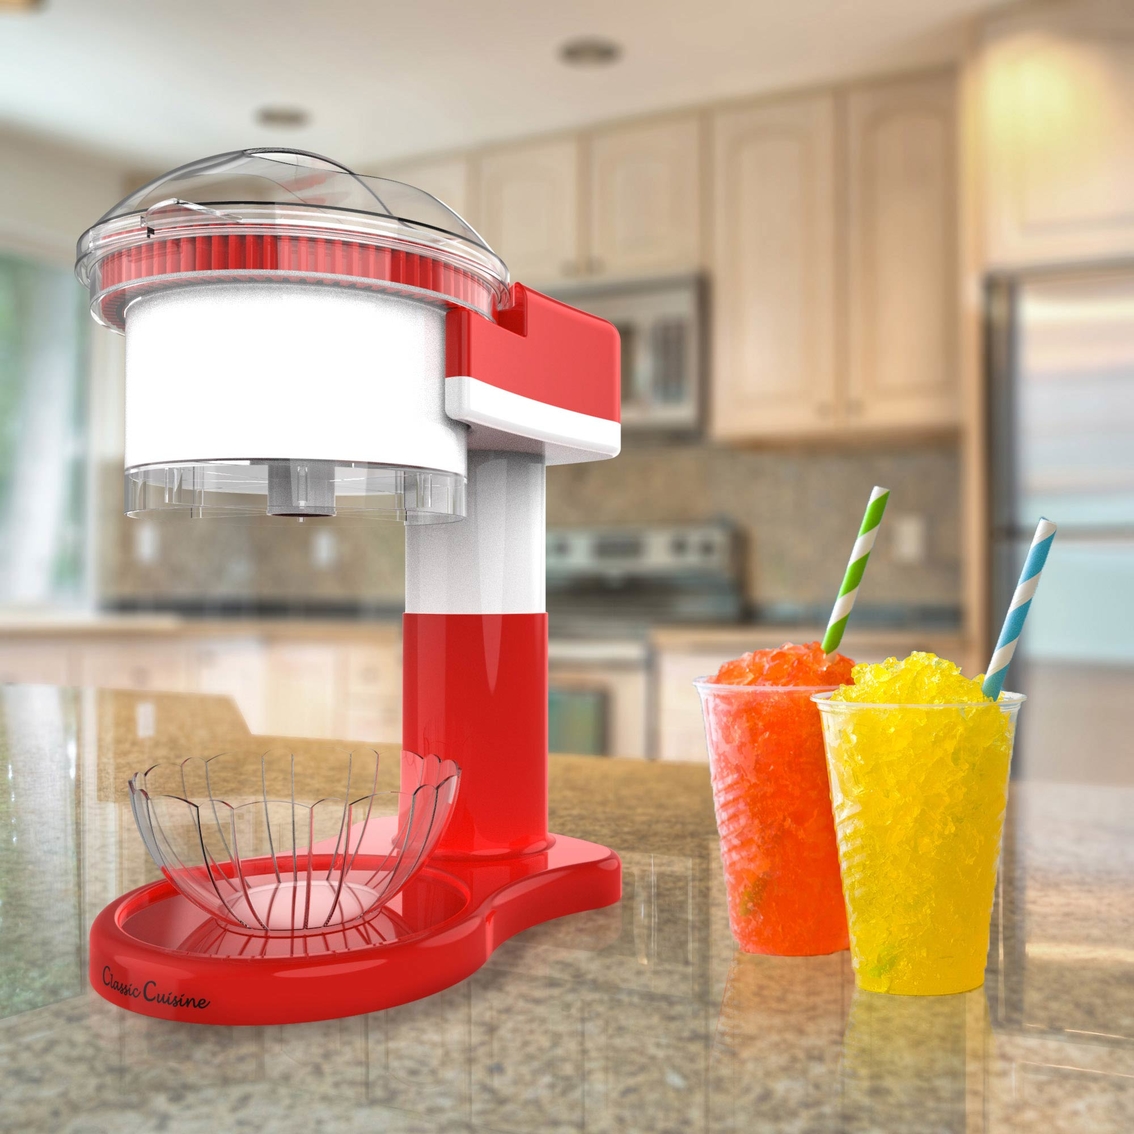 Classic Cuisine Shaved Ice Maker Snow Cone Electric Ice Shaver/Chipper - Image 4 of 4